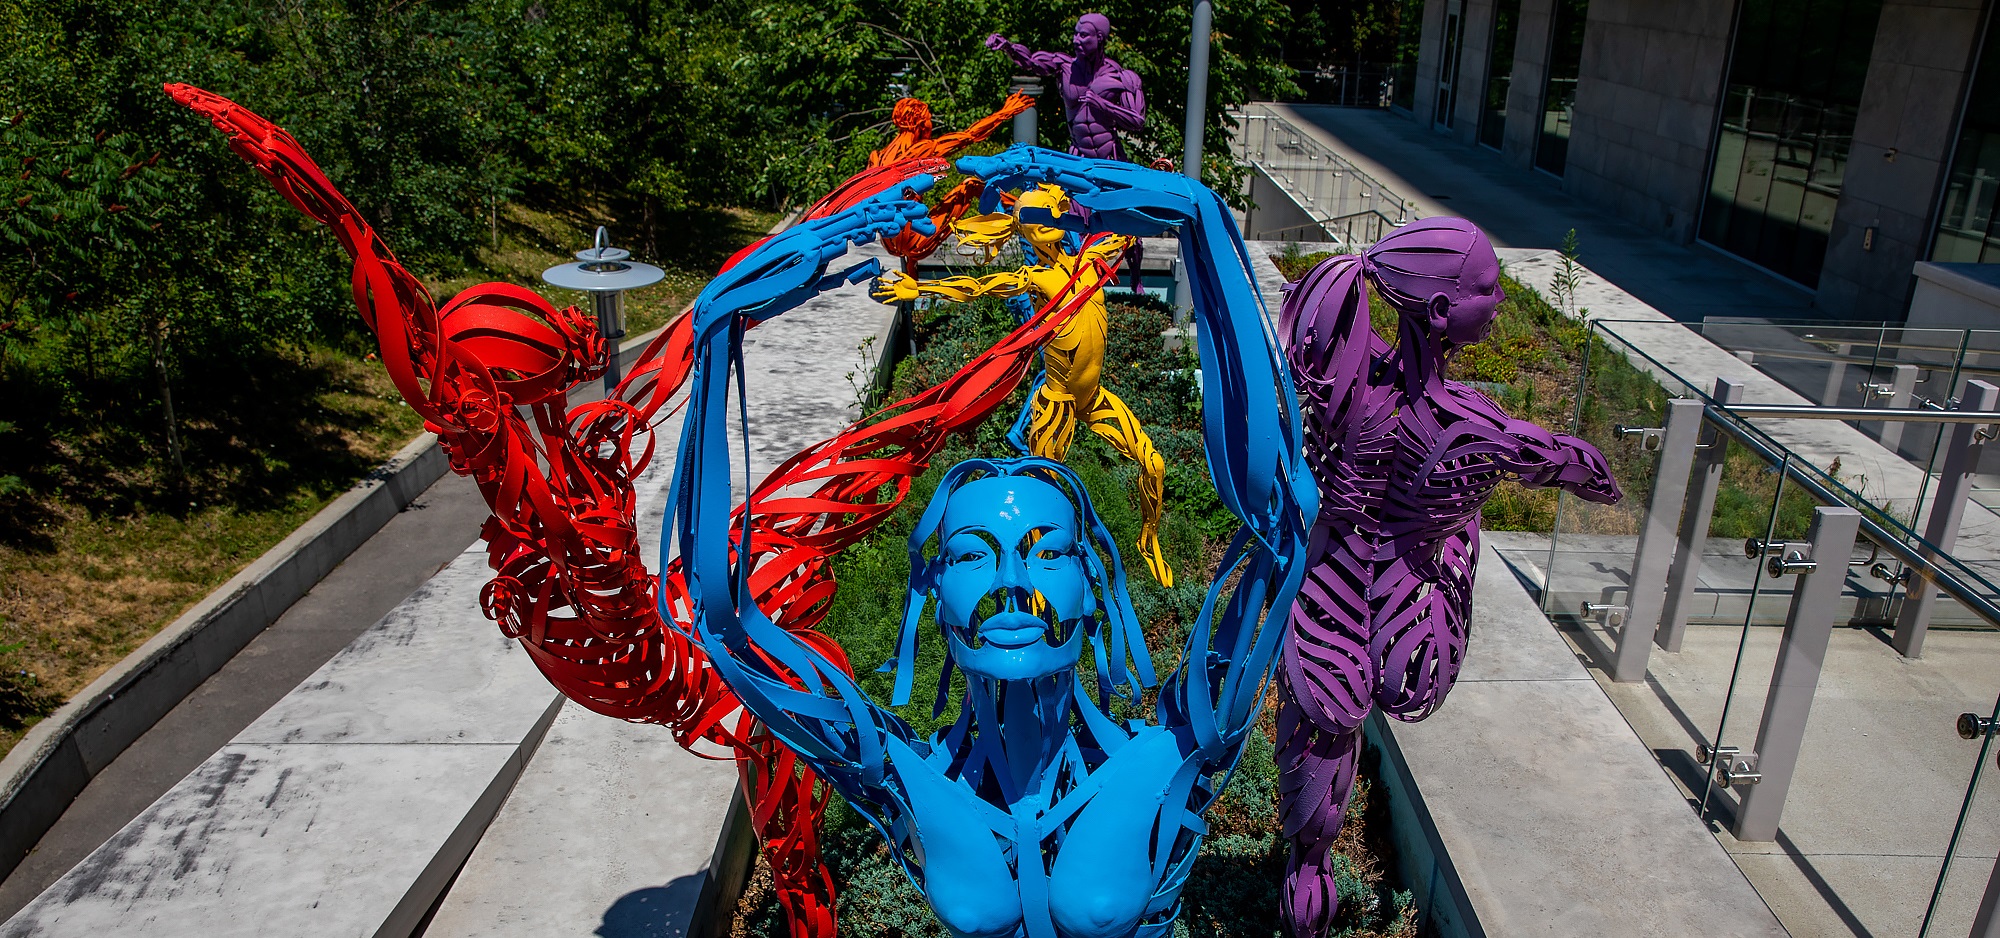 a group of six metal sculptures in the Max Tannebaum Sculpture garden. They are human figures made out of narrow strips of metal in bright colours. Each figure is depicted as if it is frozen in the middle of motion. The sculpture closest to the camera is dancing